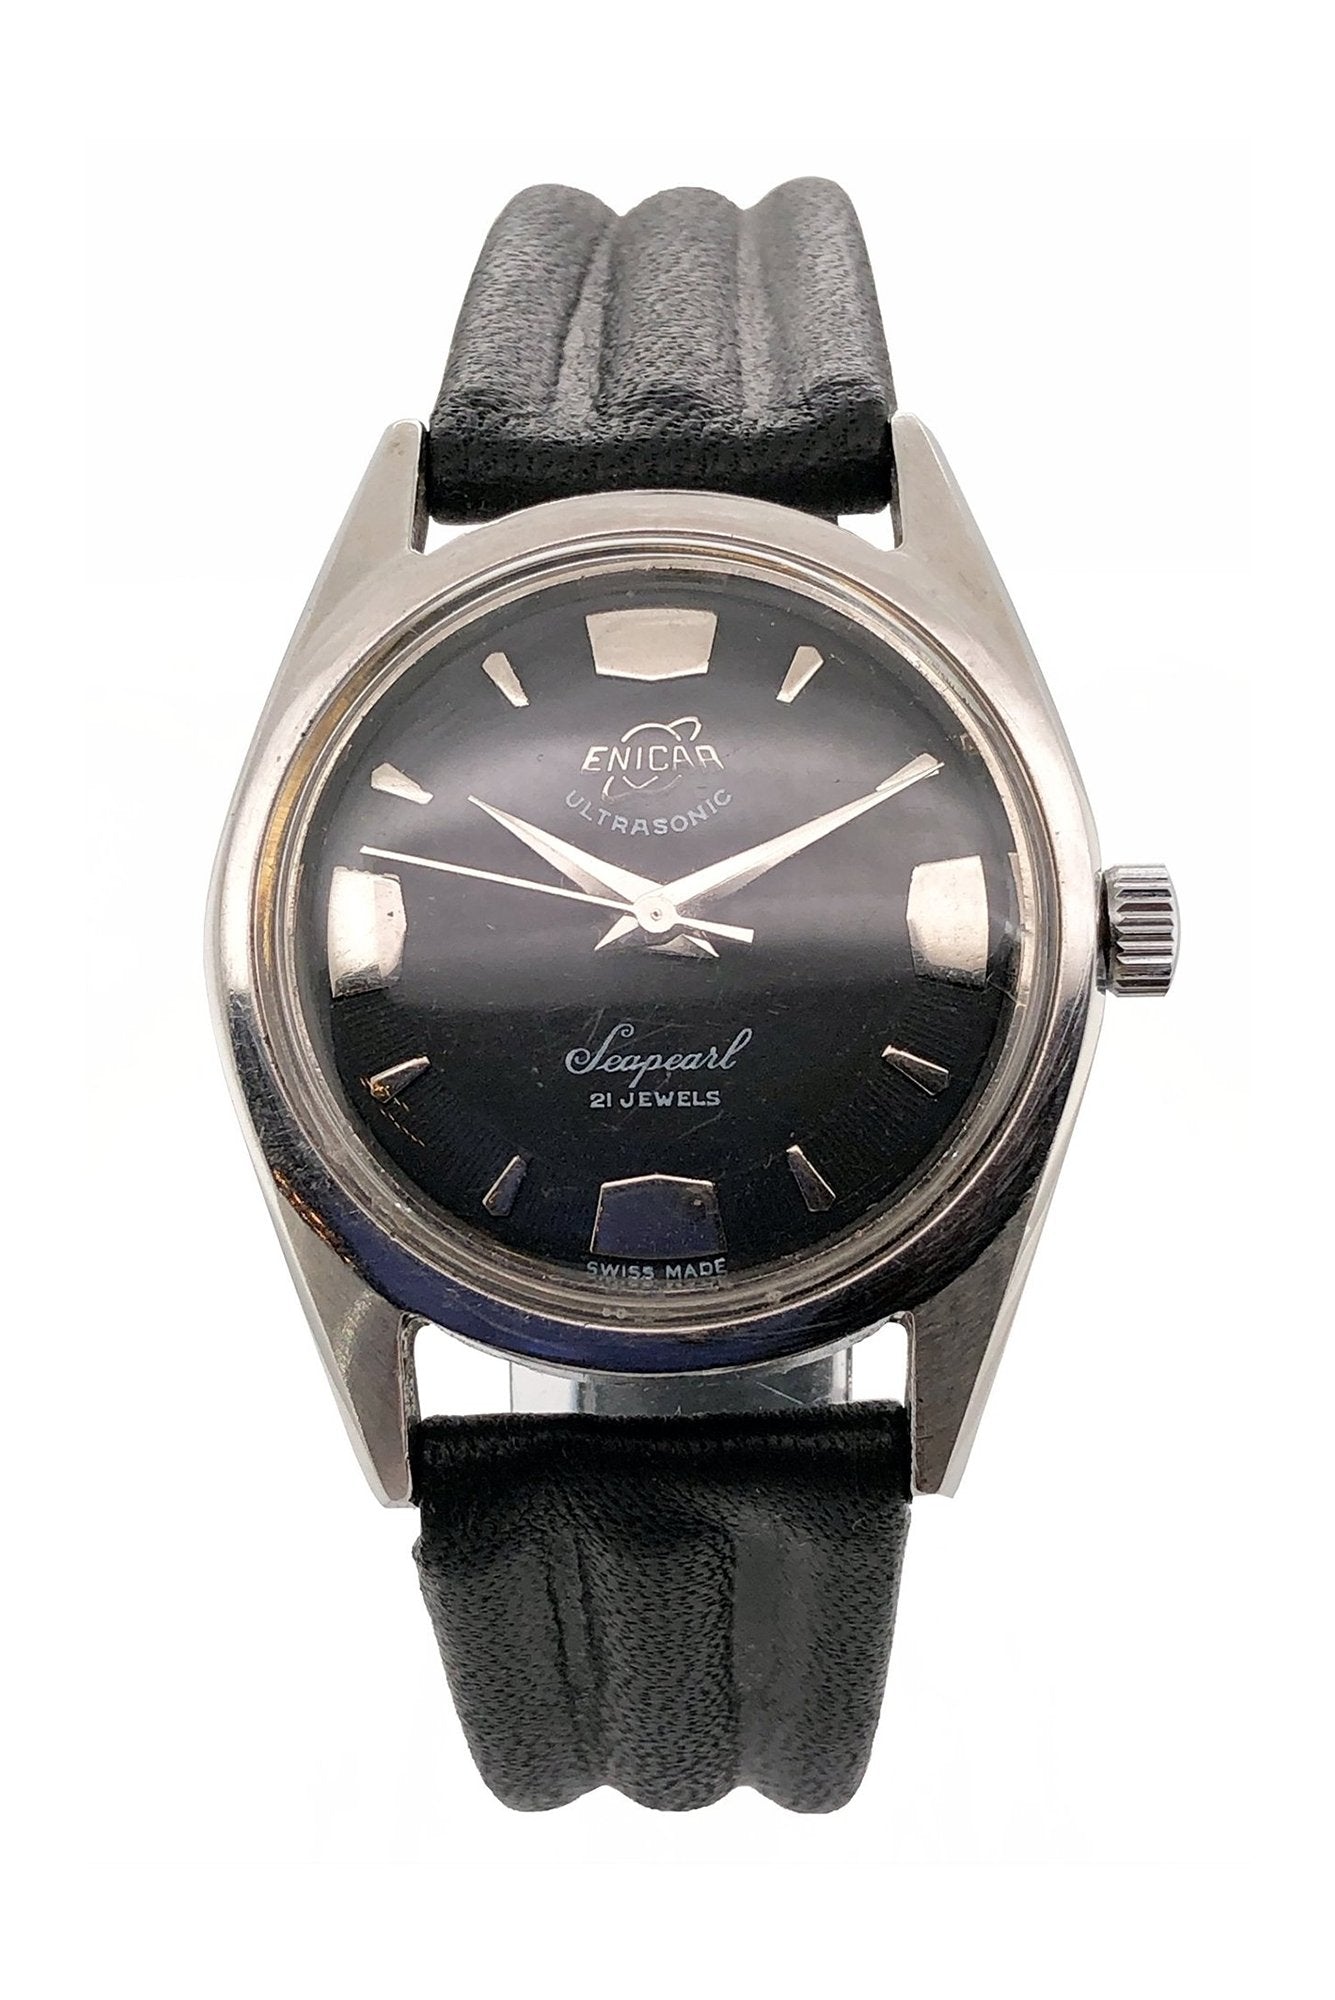 Enicar Seapearl Ultrasonic - Counting Time Watch Purveyors